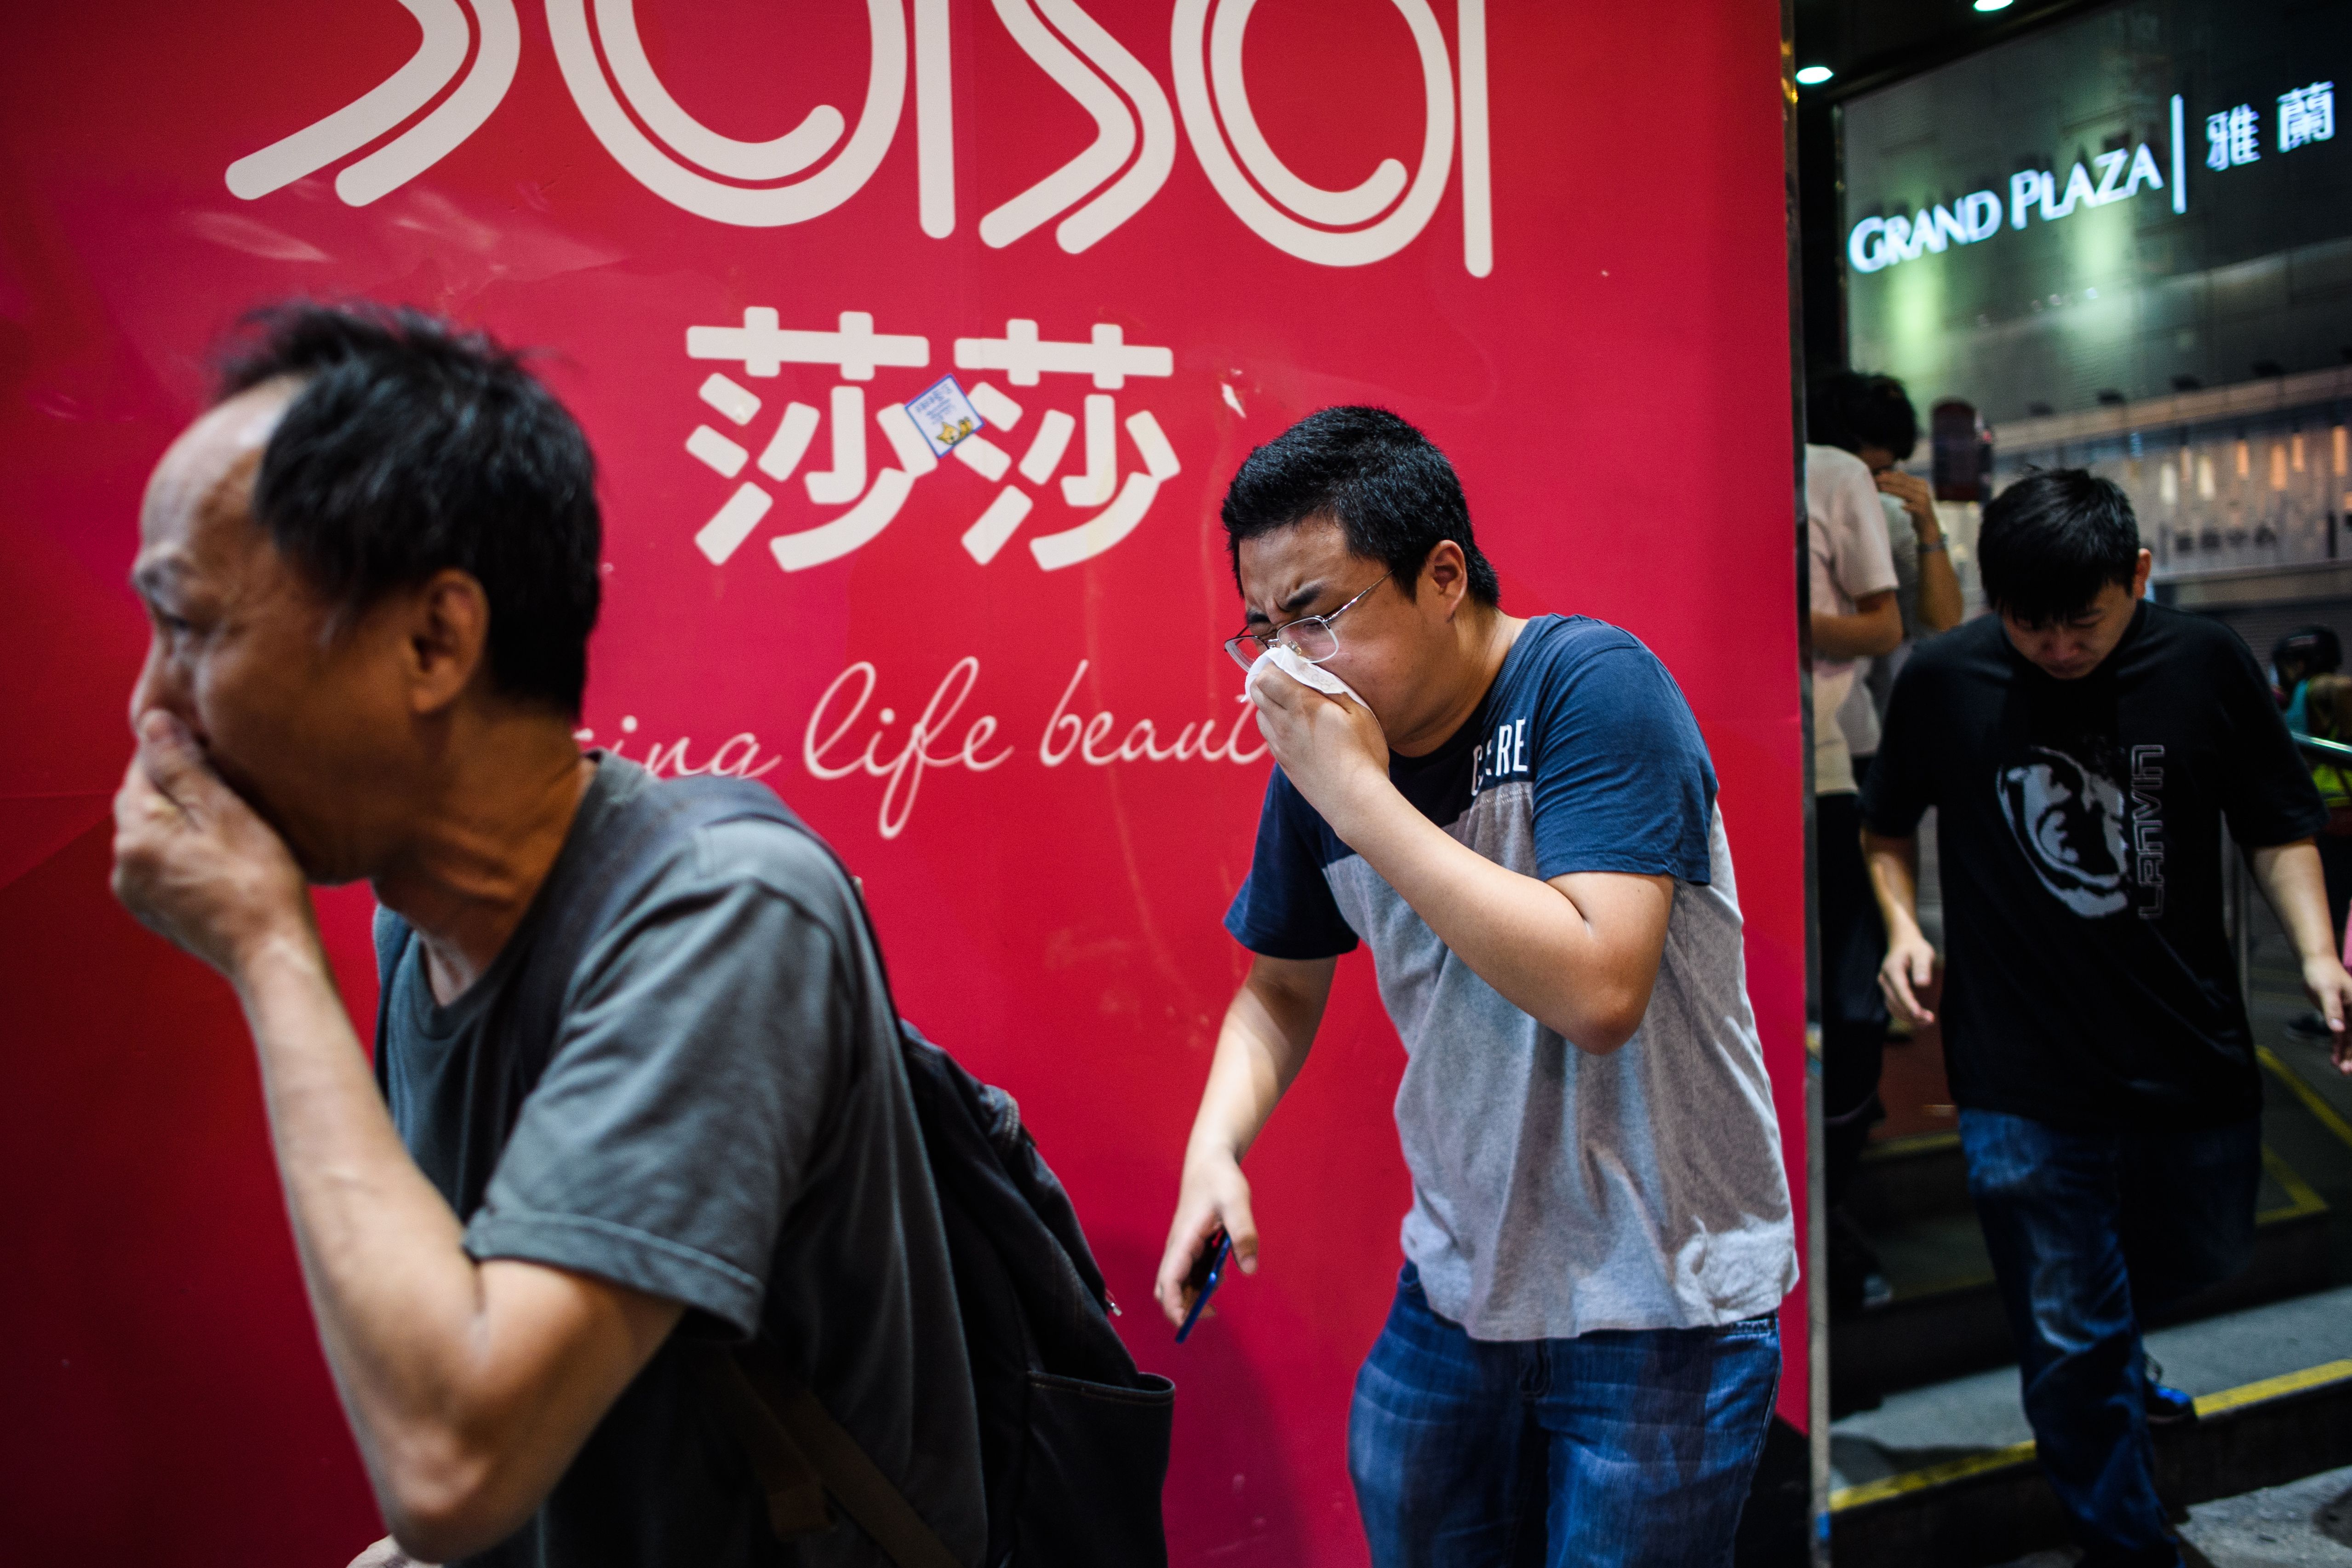 Bystanders react after police fired tear gas to disperse residents and protesters in the Mong Kok district of Kowloon in Hong Kong on October 27, 2019.